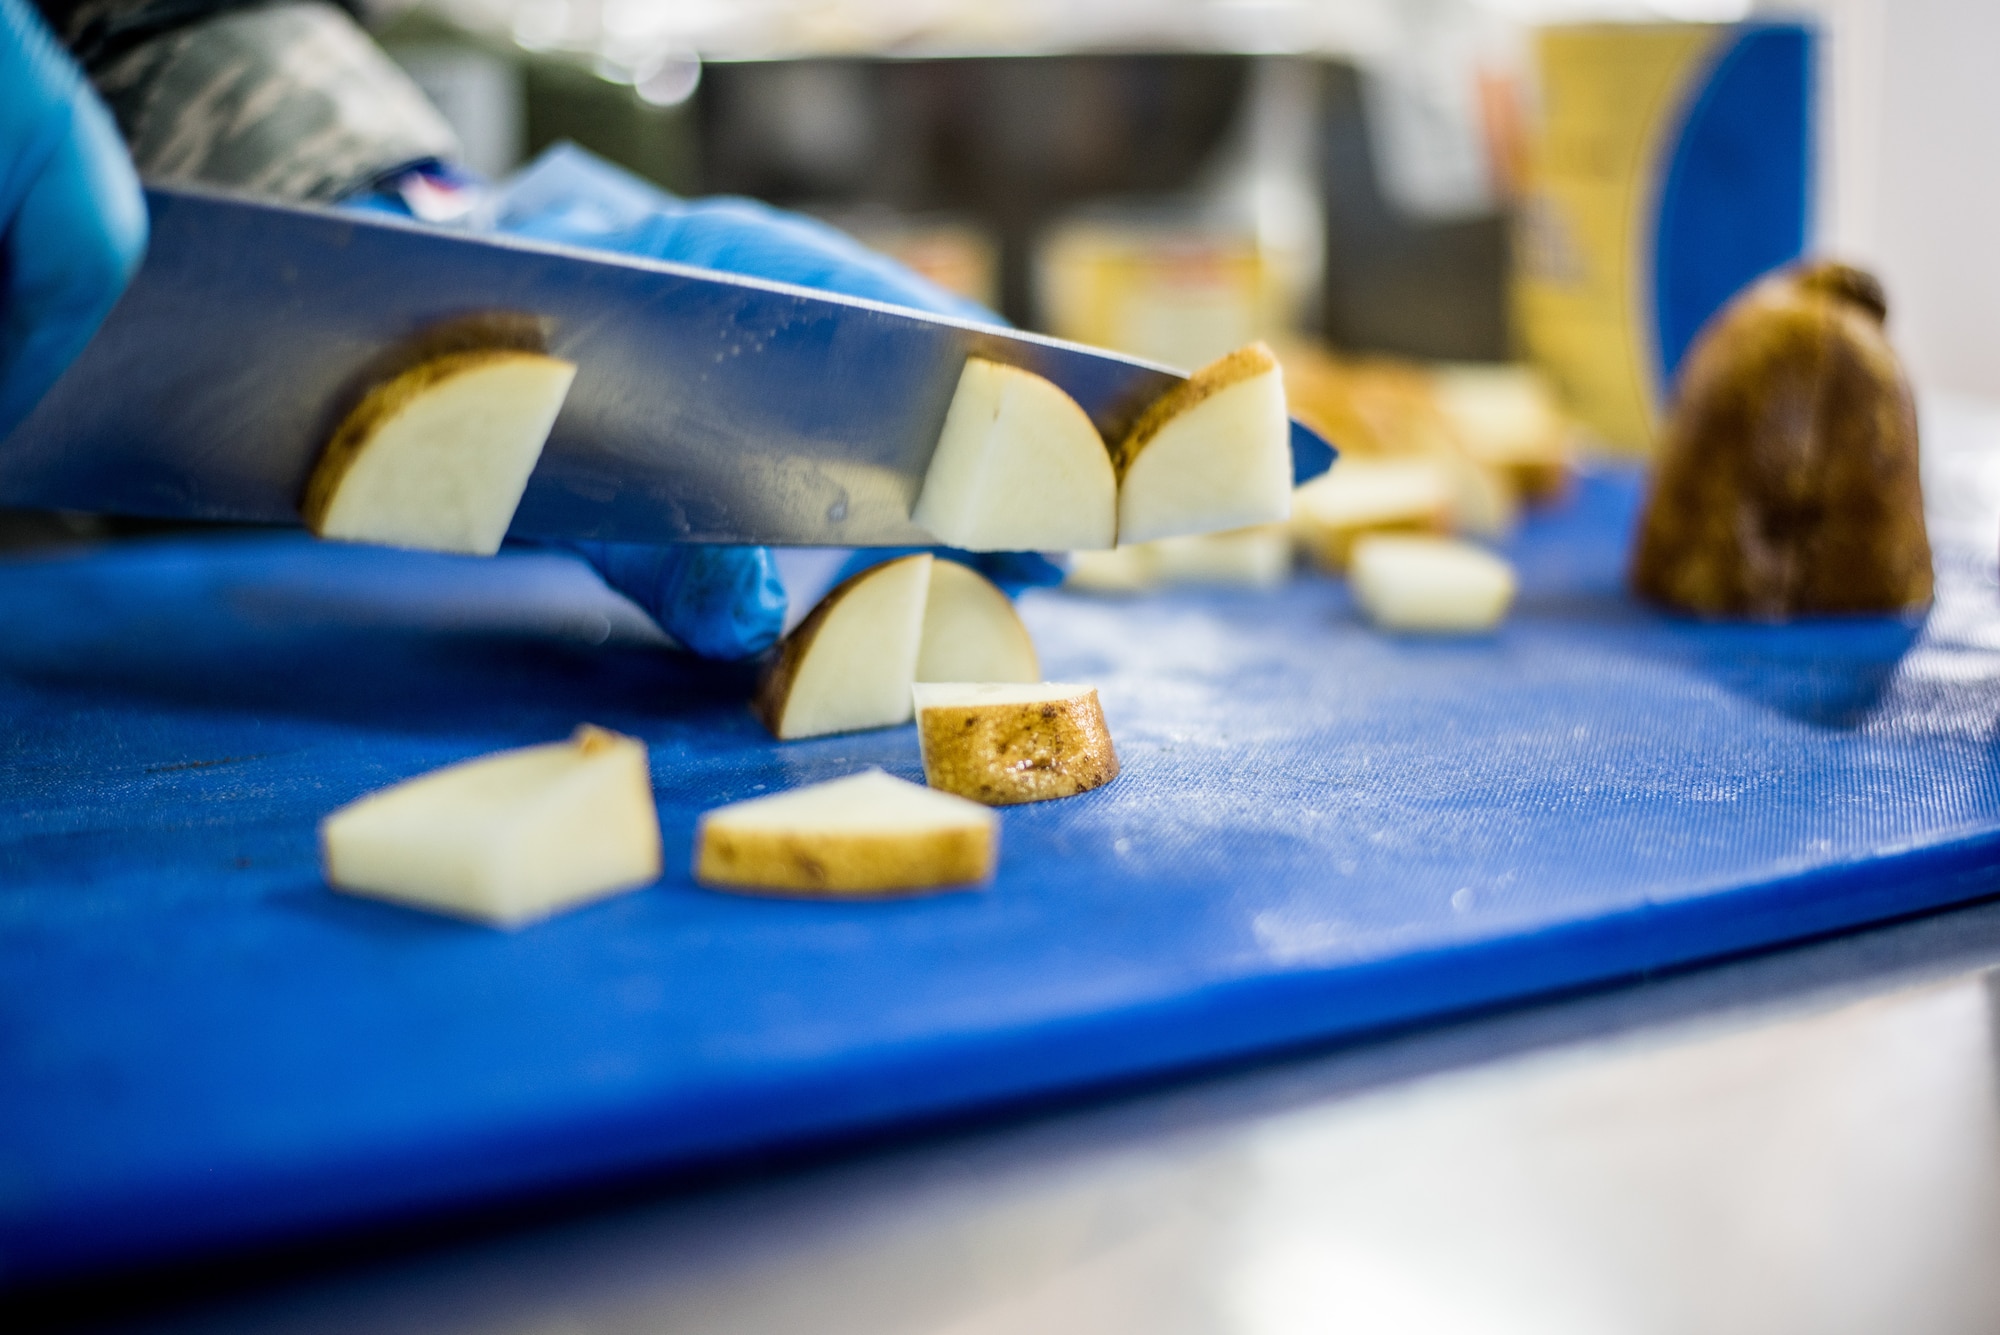 Senior Airman Bryan Seijo, 512th Memorial Affairs Squadron lodging specialist, slices potatoes during the John L. Hennessy food service competition at Dobbins Air Reserve Base, Georgia, March 9, 2019. The 2019 Hennessy food service competition focused on the competing units’ culinary arts capabilities. (U.S. Air Force photo by Staff Sgt. Damien Taylor)